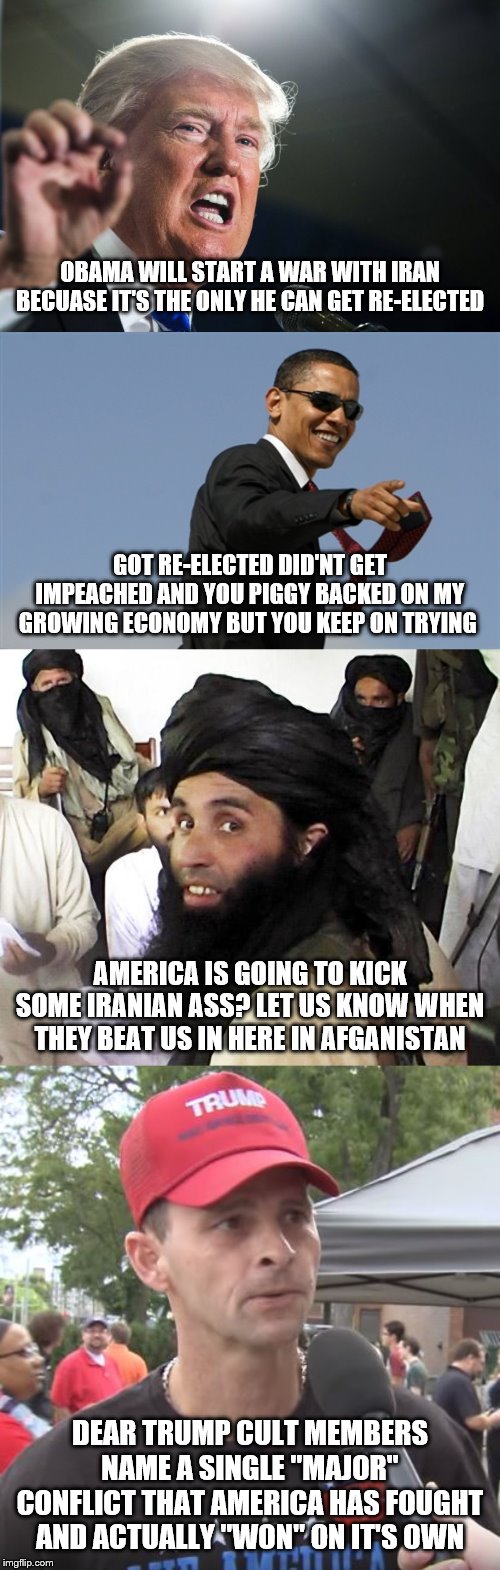 OBAMA WILL START A WAR WITH IRAN BECUASE IT'S THE ONLY HE CAN GET RE-ELECTED; GOT RE-ELECTED DID'NT GET IMPEACHED AND YOU PIGGY BACKED ON MY GROWING ECONOMY BUT YOU KEEP ON TRYING; AMERICA IS GOING TO KICK SOME IRANIAN ASS? LET US KNOW WHEN THEY BEAT US IN HERE IN AFGANISTAN; DEAR TRUMP CULT MEMBERS NAME A SINGLE "MAJOR" CONFLICT THAT AMERICA HAS FOUGHT AND ACTUALLY "WON" ON IT'S OWN | image tagged in memes,cool obama,taliban,donald trump,trump supporter | made w/ Imgflip meme maker